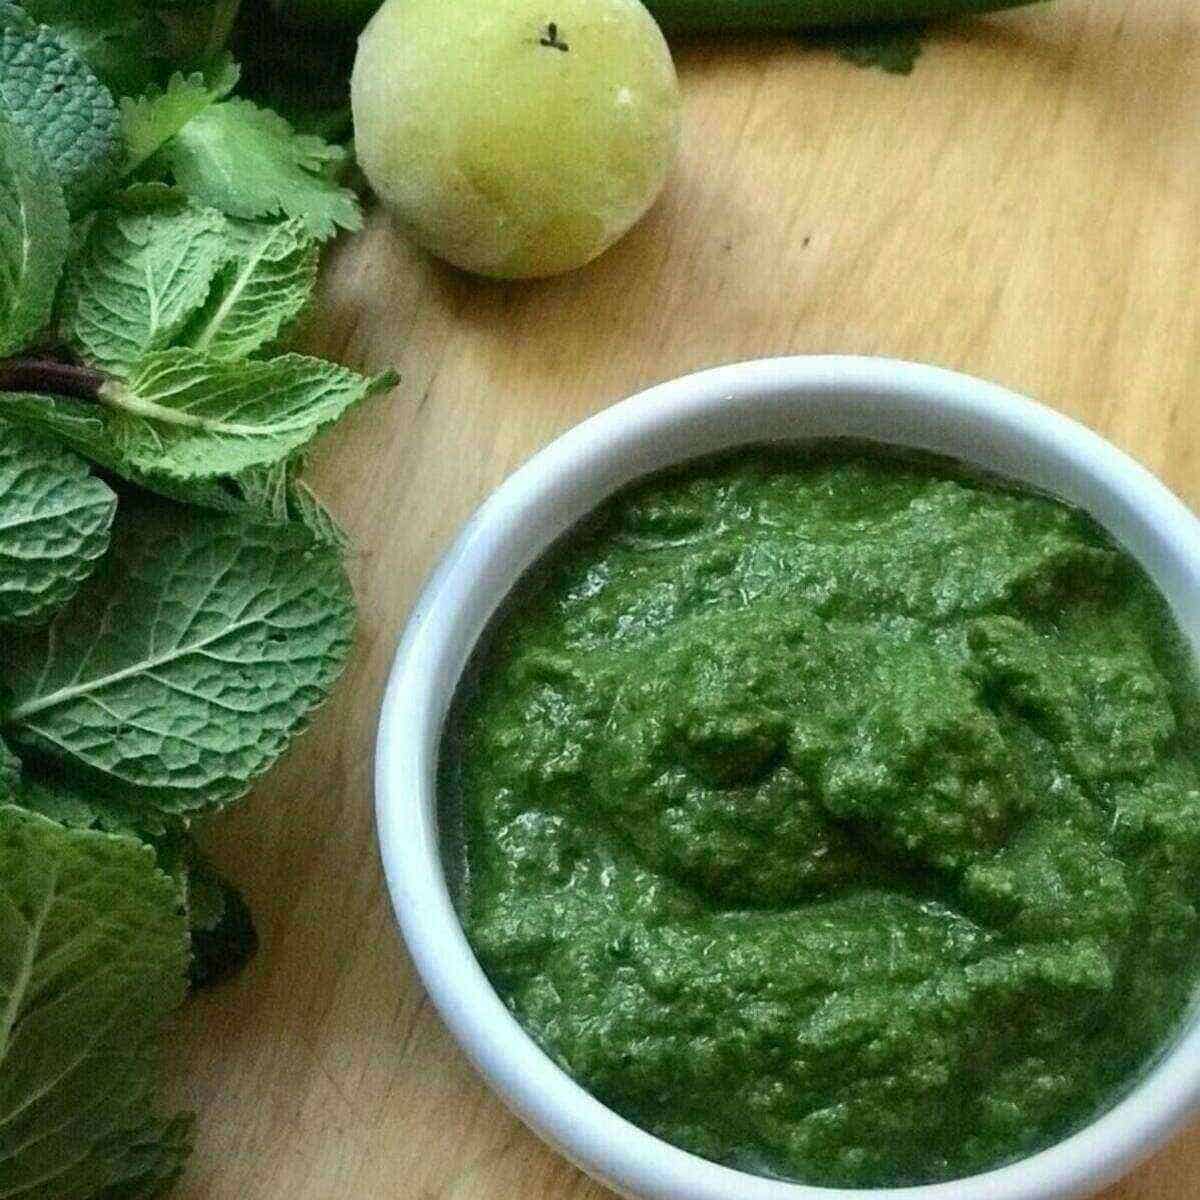 Cilantro mint chutney made with gooseberry, fresh coriander, mint and green chillies served in a round white bowl and placed on a table with fresh greens on the side.